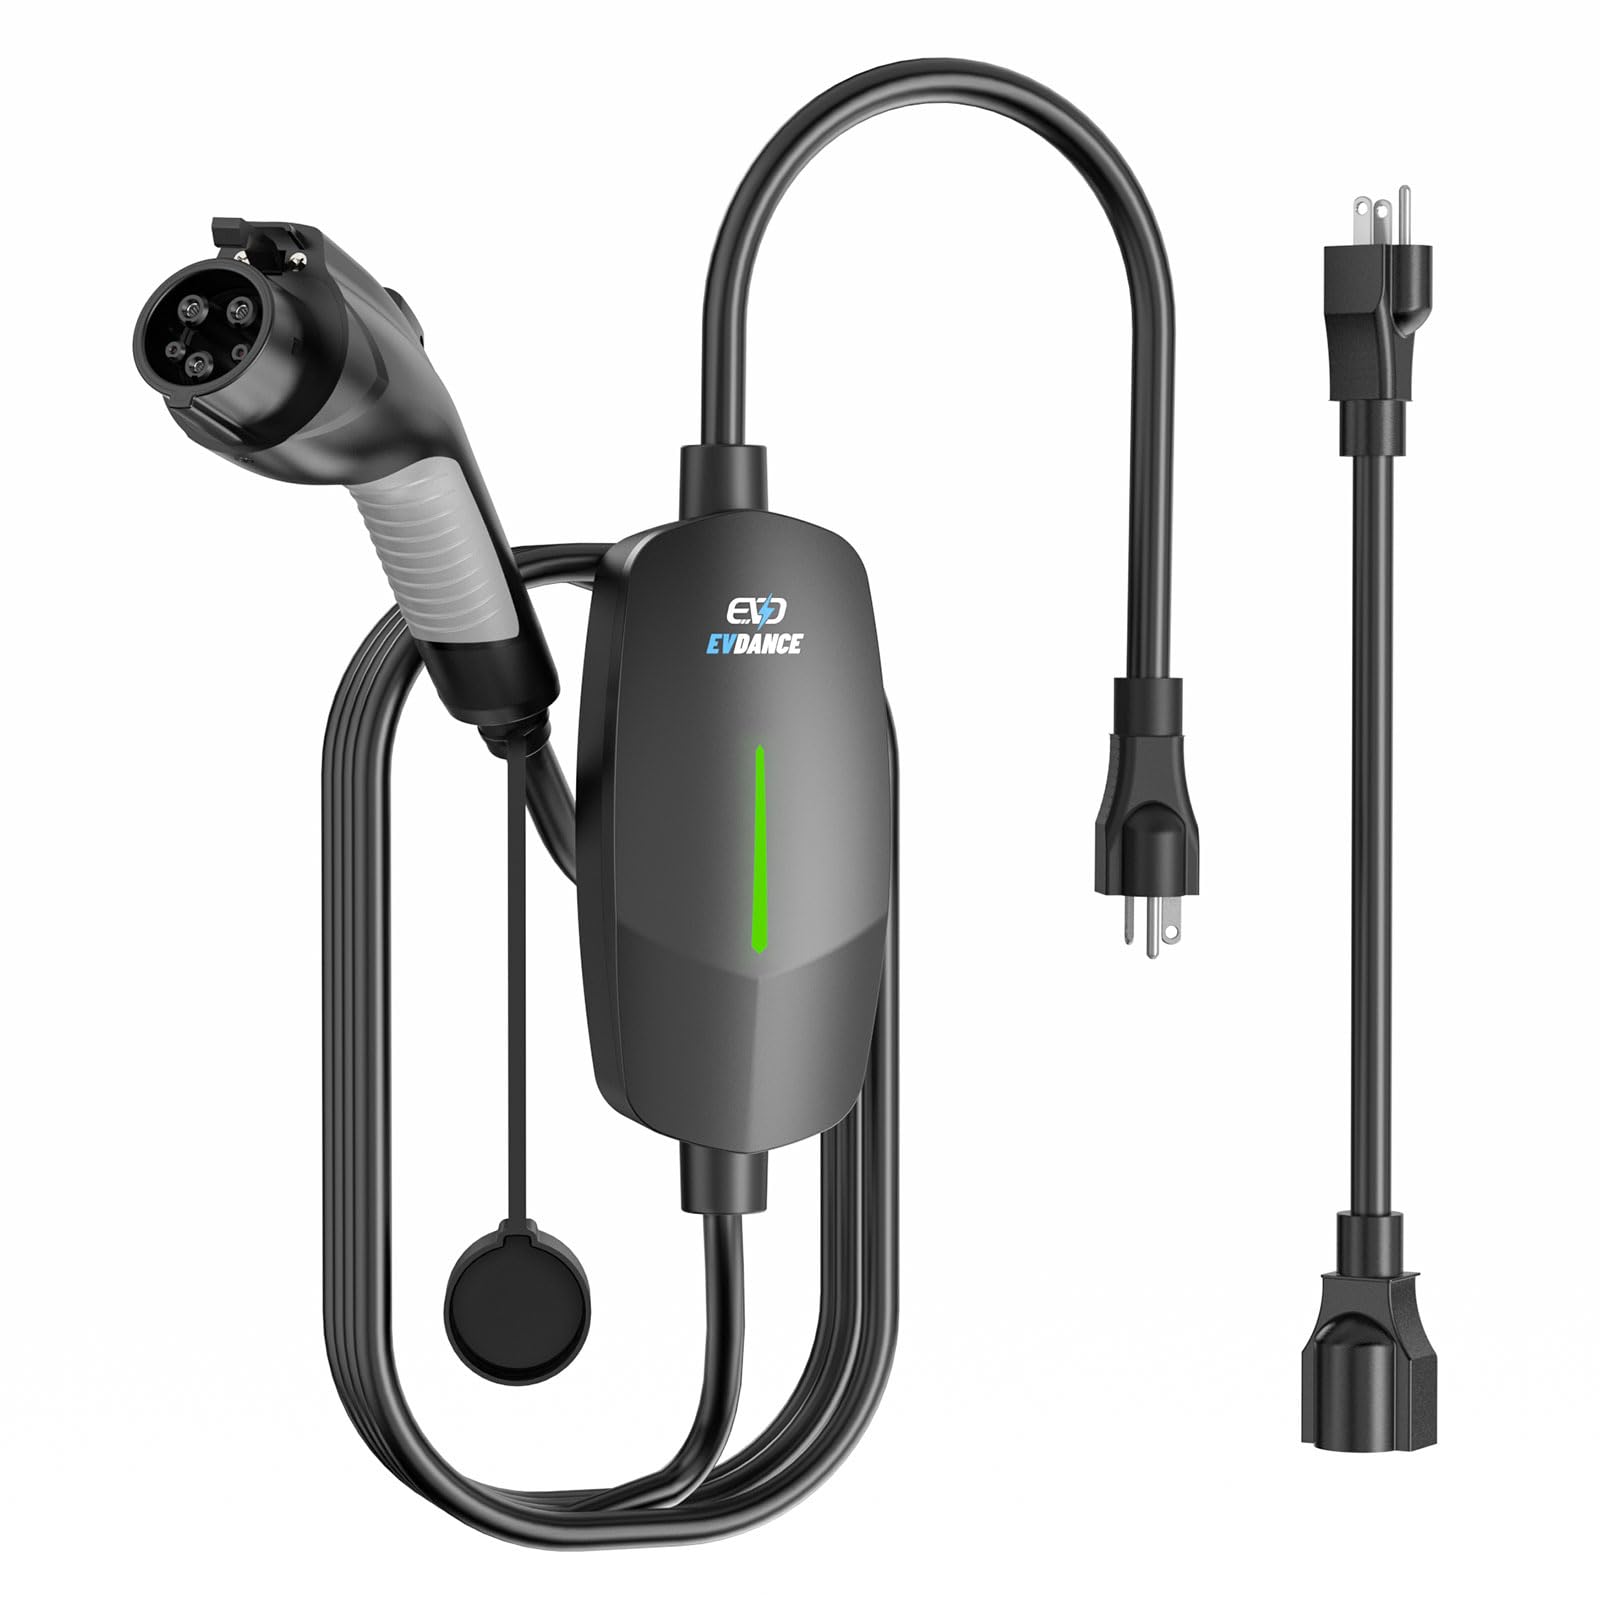 16A Type 2 Portable EV Mode 2charger for Electric Vehicle Charging